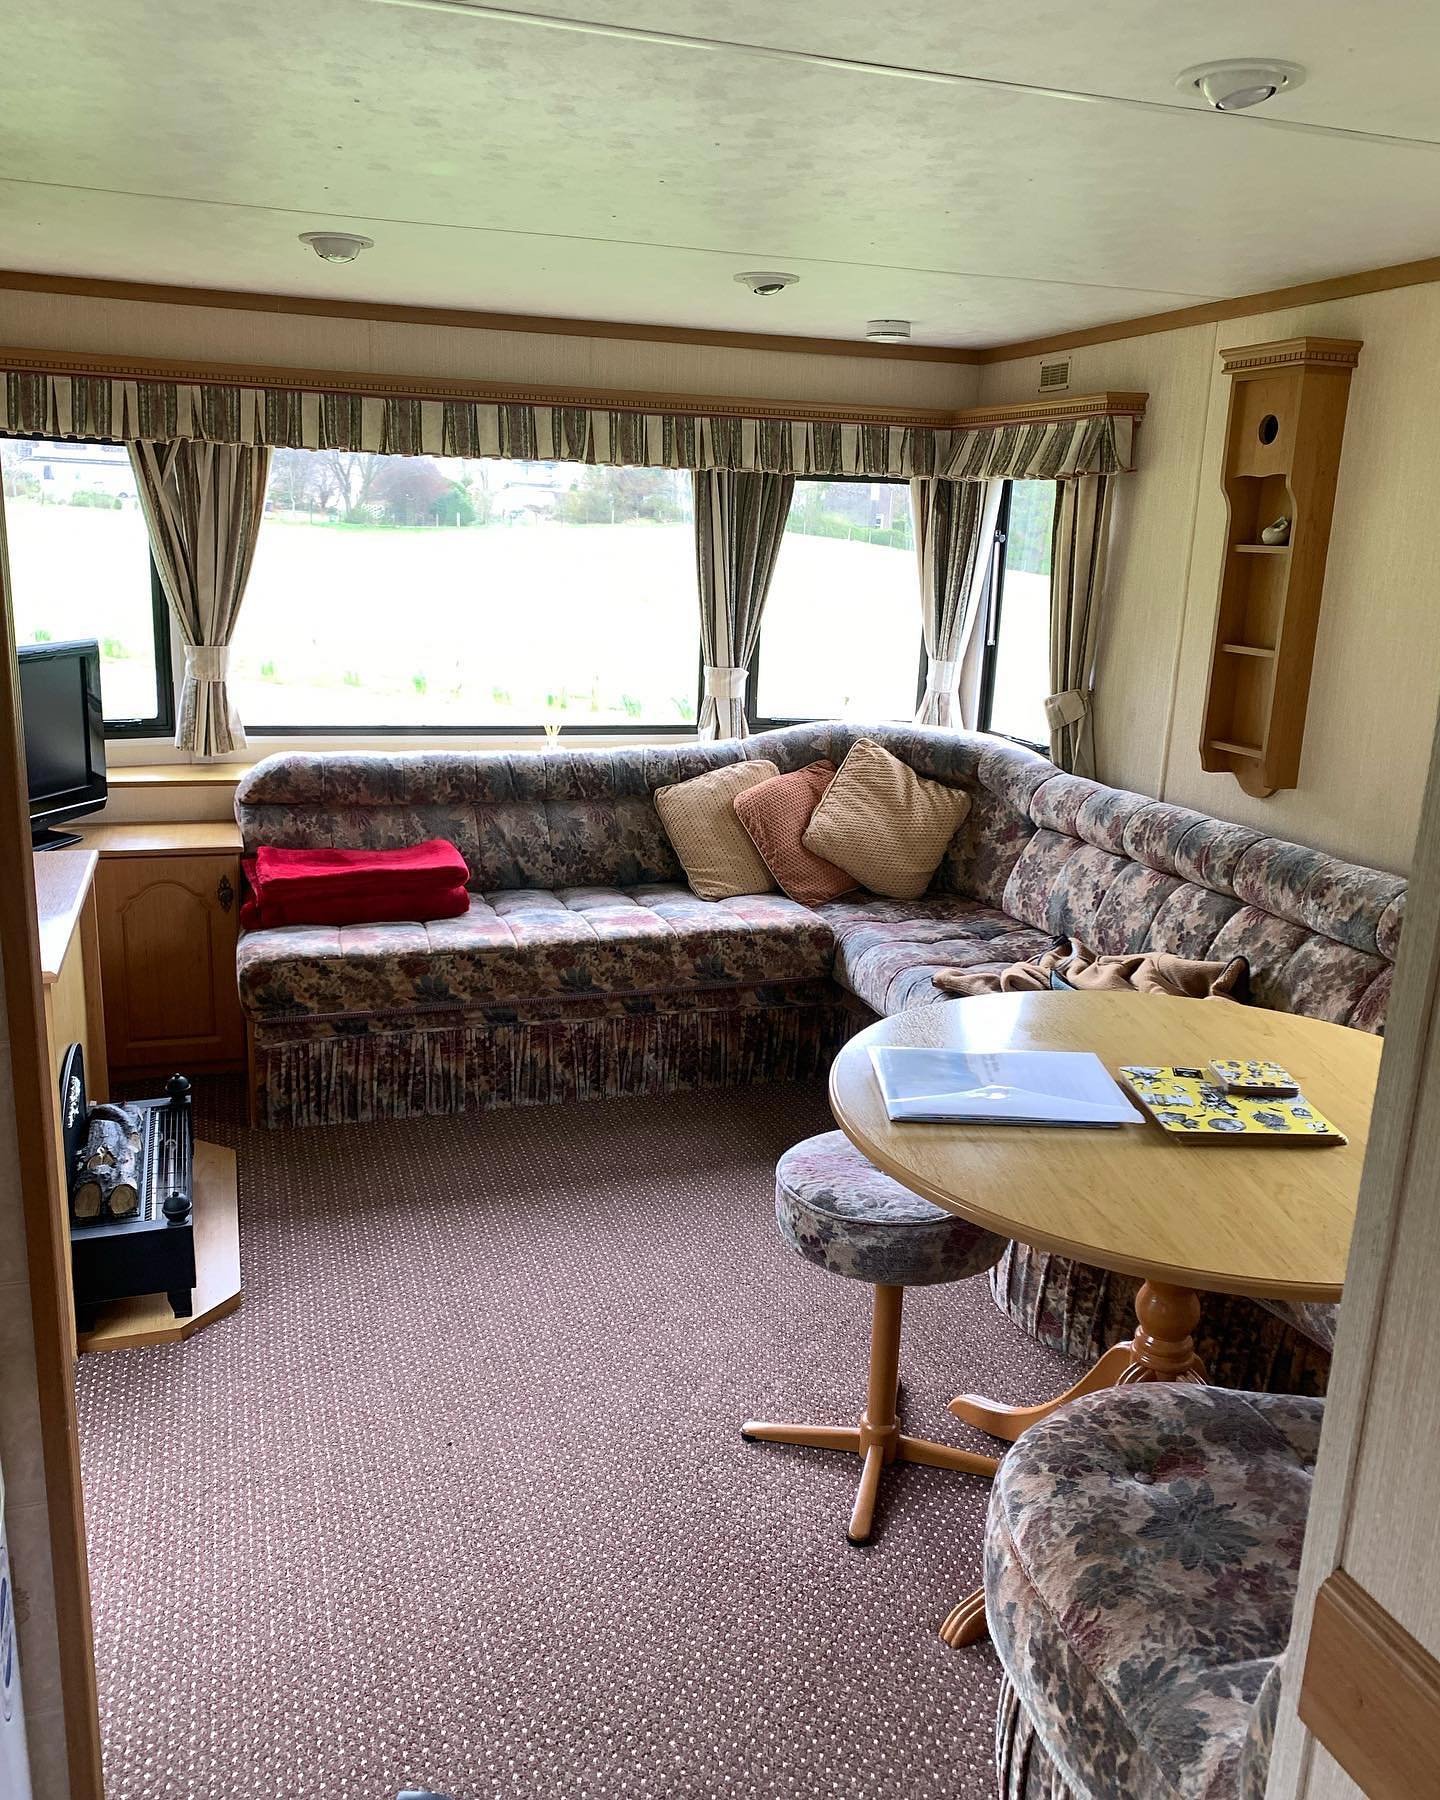 Affordable accommodation to suit everyone&rsquo;s needs. Our static caravans sleep five and offer the perfect getaway in the heart of the Scottish Highlands. 

Caravan&rsquo;s transport you back in time to simpler, more carefree days and are filled w